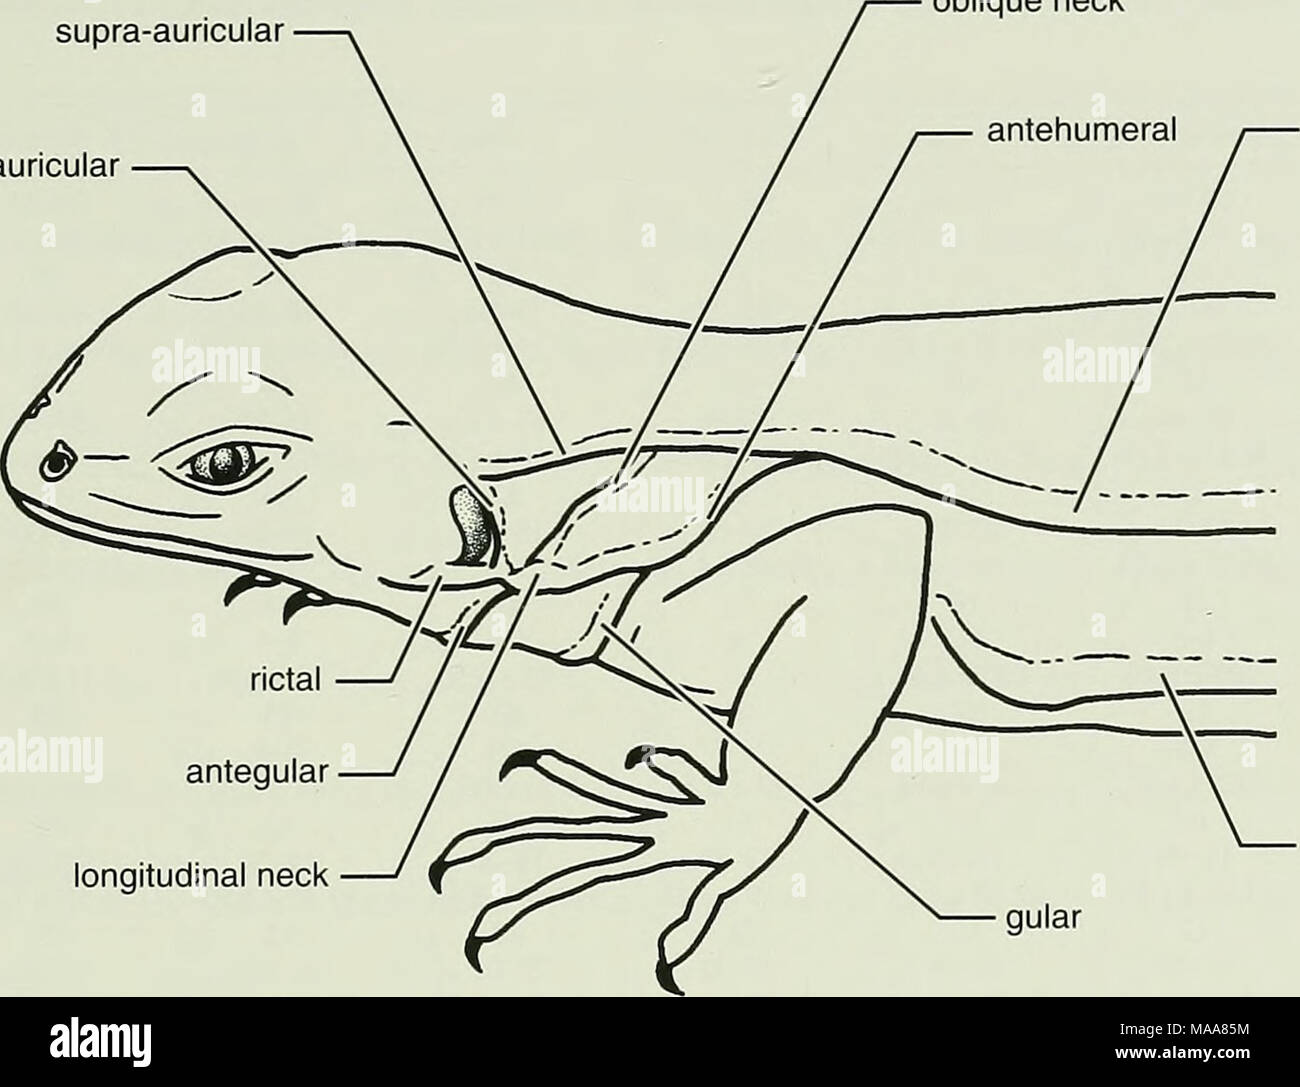 . Ecuadorian lizards of the genus Stenocercus (Squamata: Tropiduridae) . dorsolateral rictal antegular longitudinal neck ventrolateral Fig. 1. Neck folds in Stenocercus. Illustration by L. Analla Pugener. Antegular fold.âThis fold traverses the ventral sur- face of the neck anterior to the gular fold. Longitudinal neck fold.âThis longitudinal fold ex- tends along the ventrolateral part of the body from the posteroventral edge of the ear to the forelimb. Postauricular fold.âThis fold Ues immediately behind the ear usually is confluent with the longitudinal neck fold and the supra-auricular fold Stock Photo